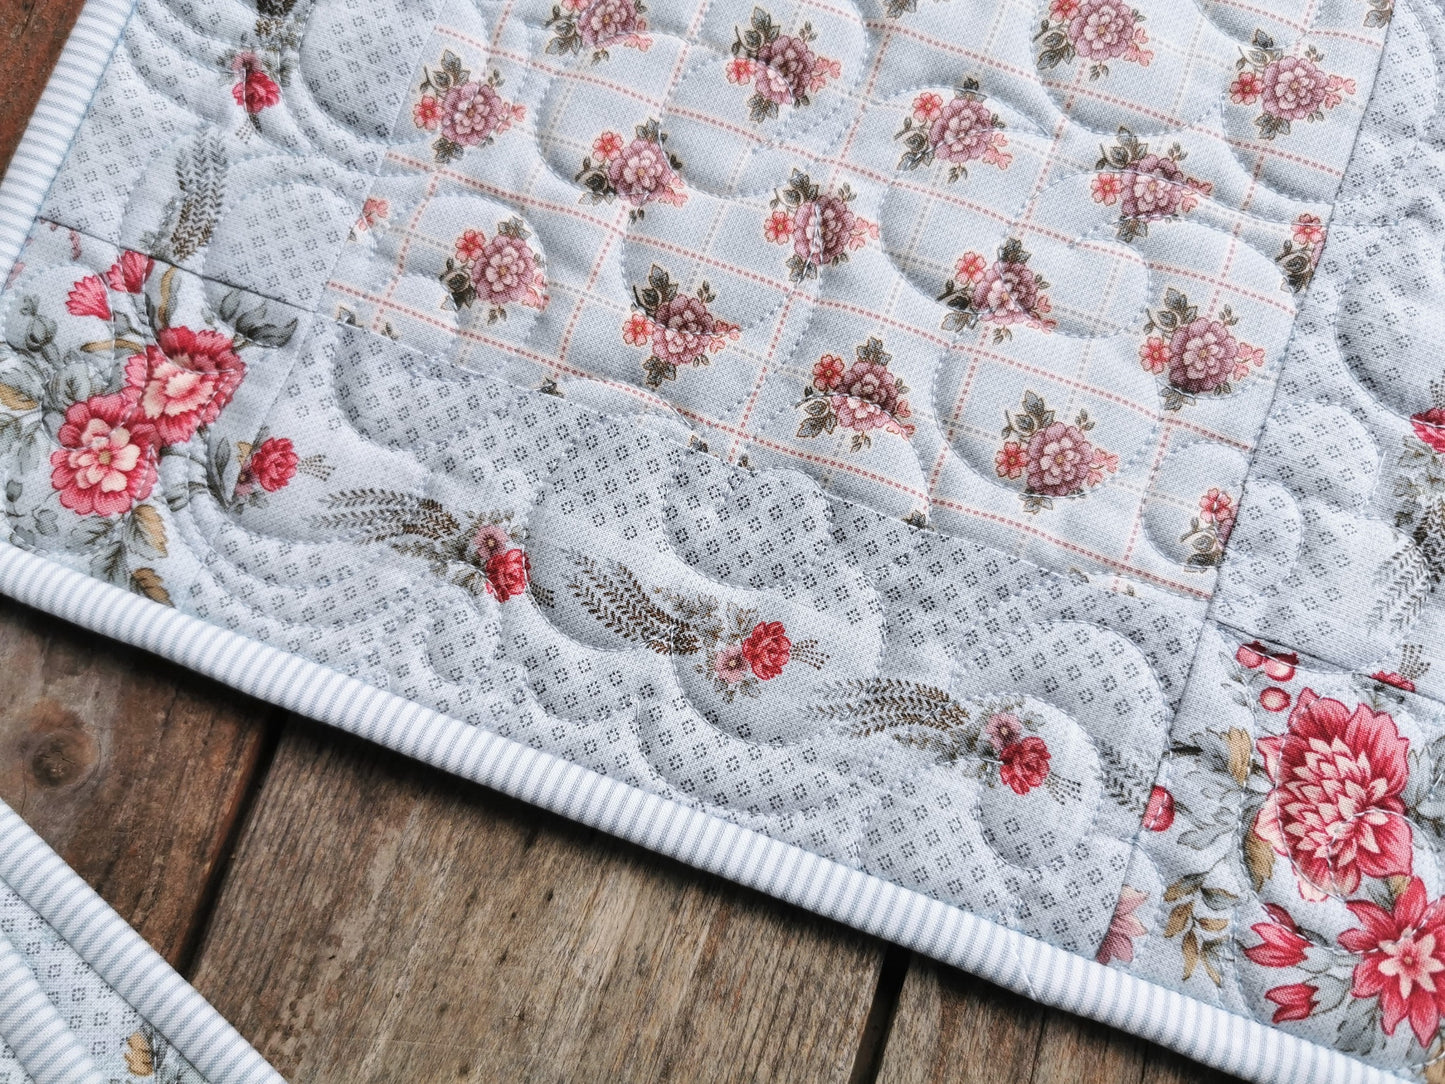 Super close up view shows the detail of the beautiful french floral fabrics, pale blue background and pinstripe binding. Workmanship and quilting is also displayed prominently.